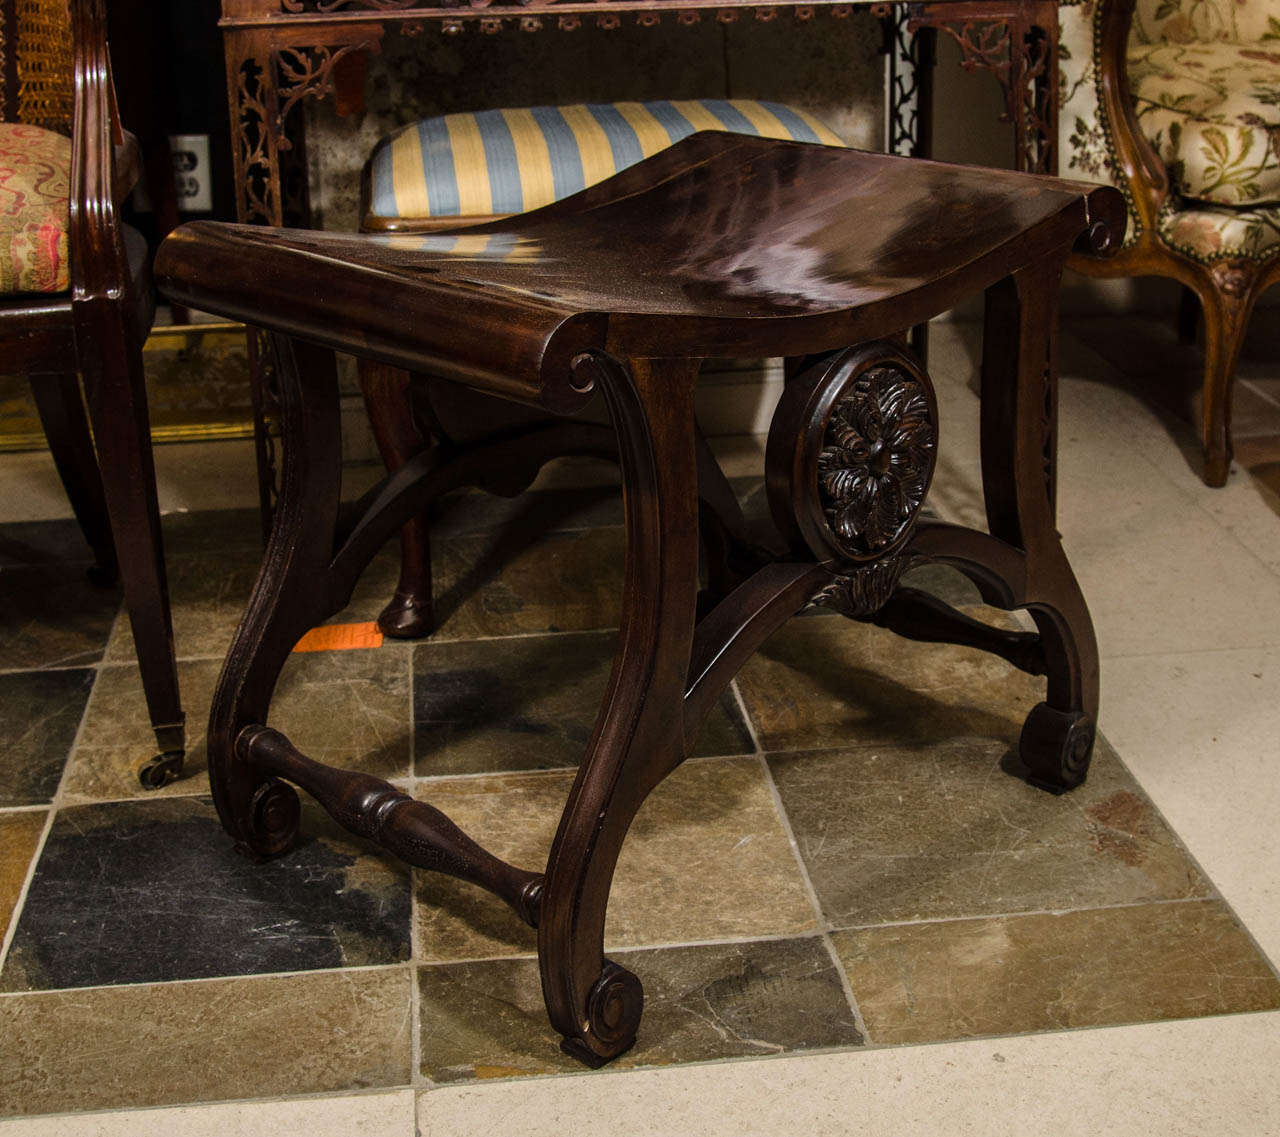 A finely carved George II (Thomas Chippendale) style saddle seat stool with carved rosette.